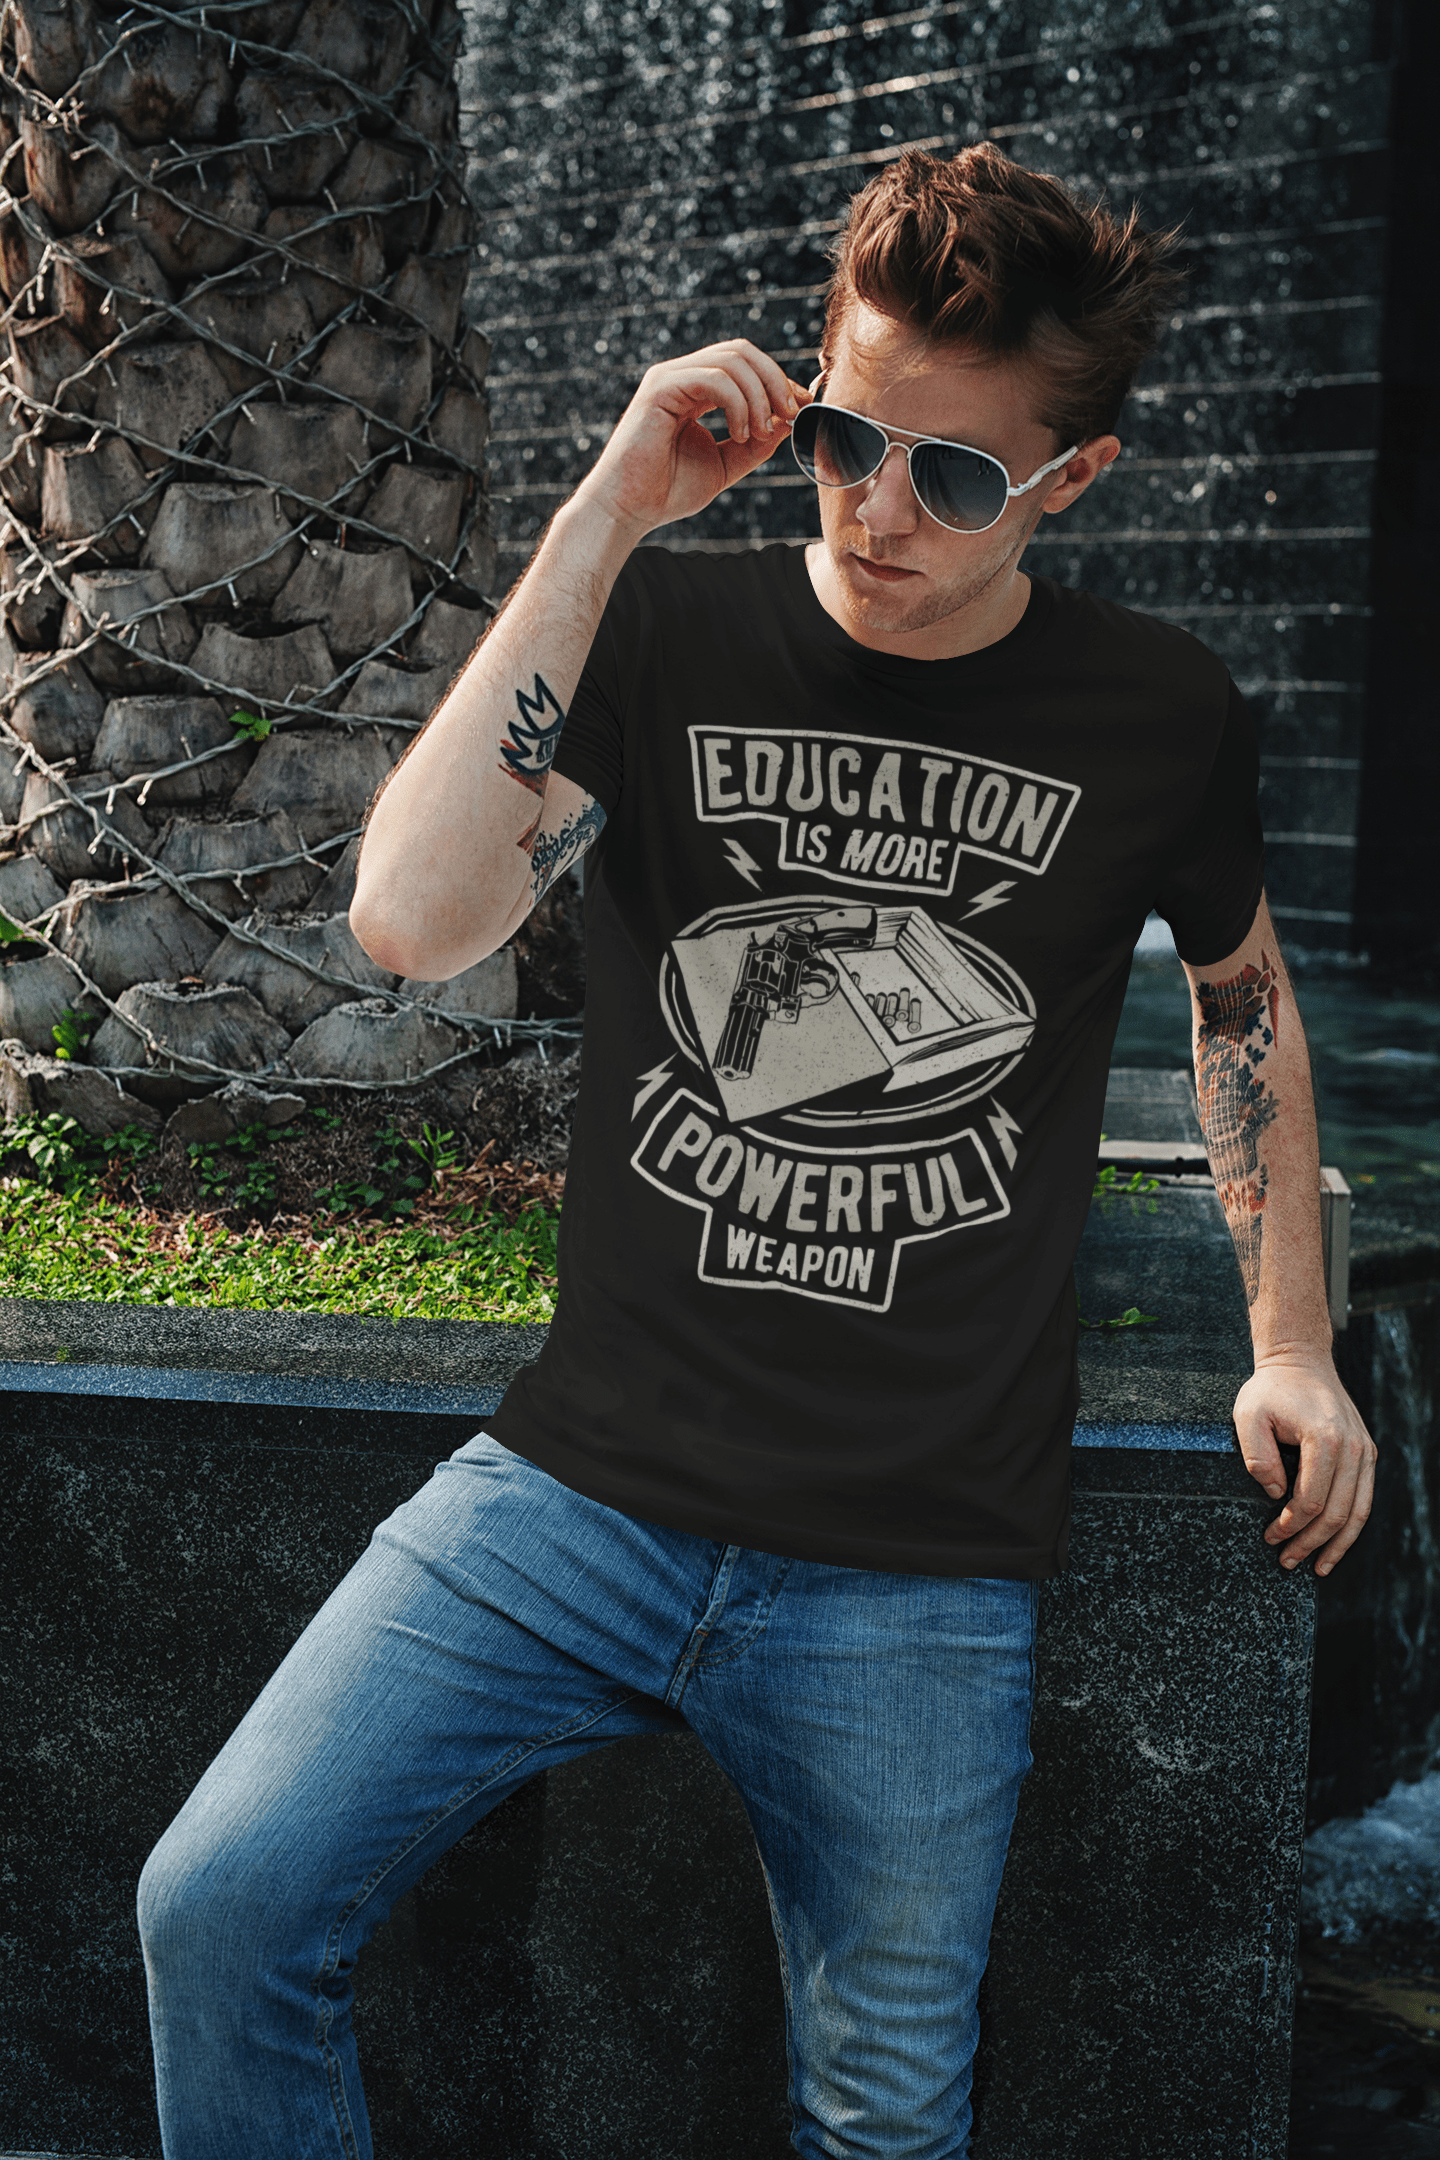 ULTRABASIC Men's Graphic T-Shirt Education Is More Powerful Weapon - Quote Shirt